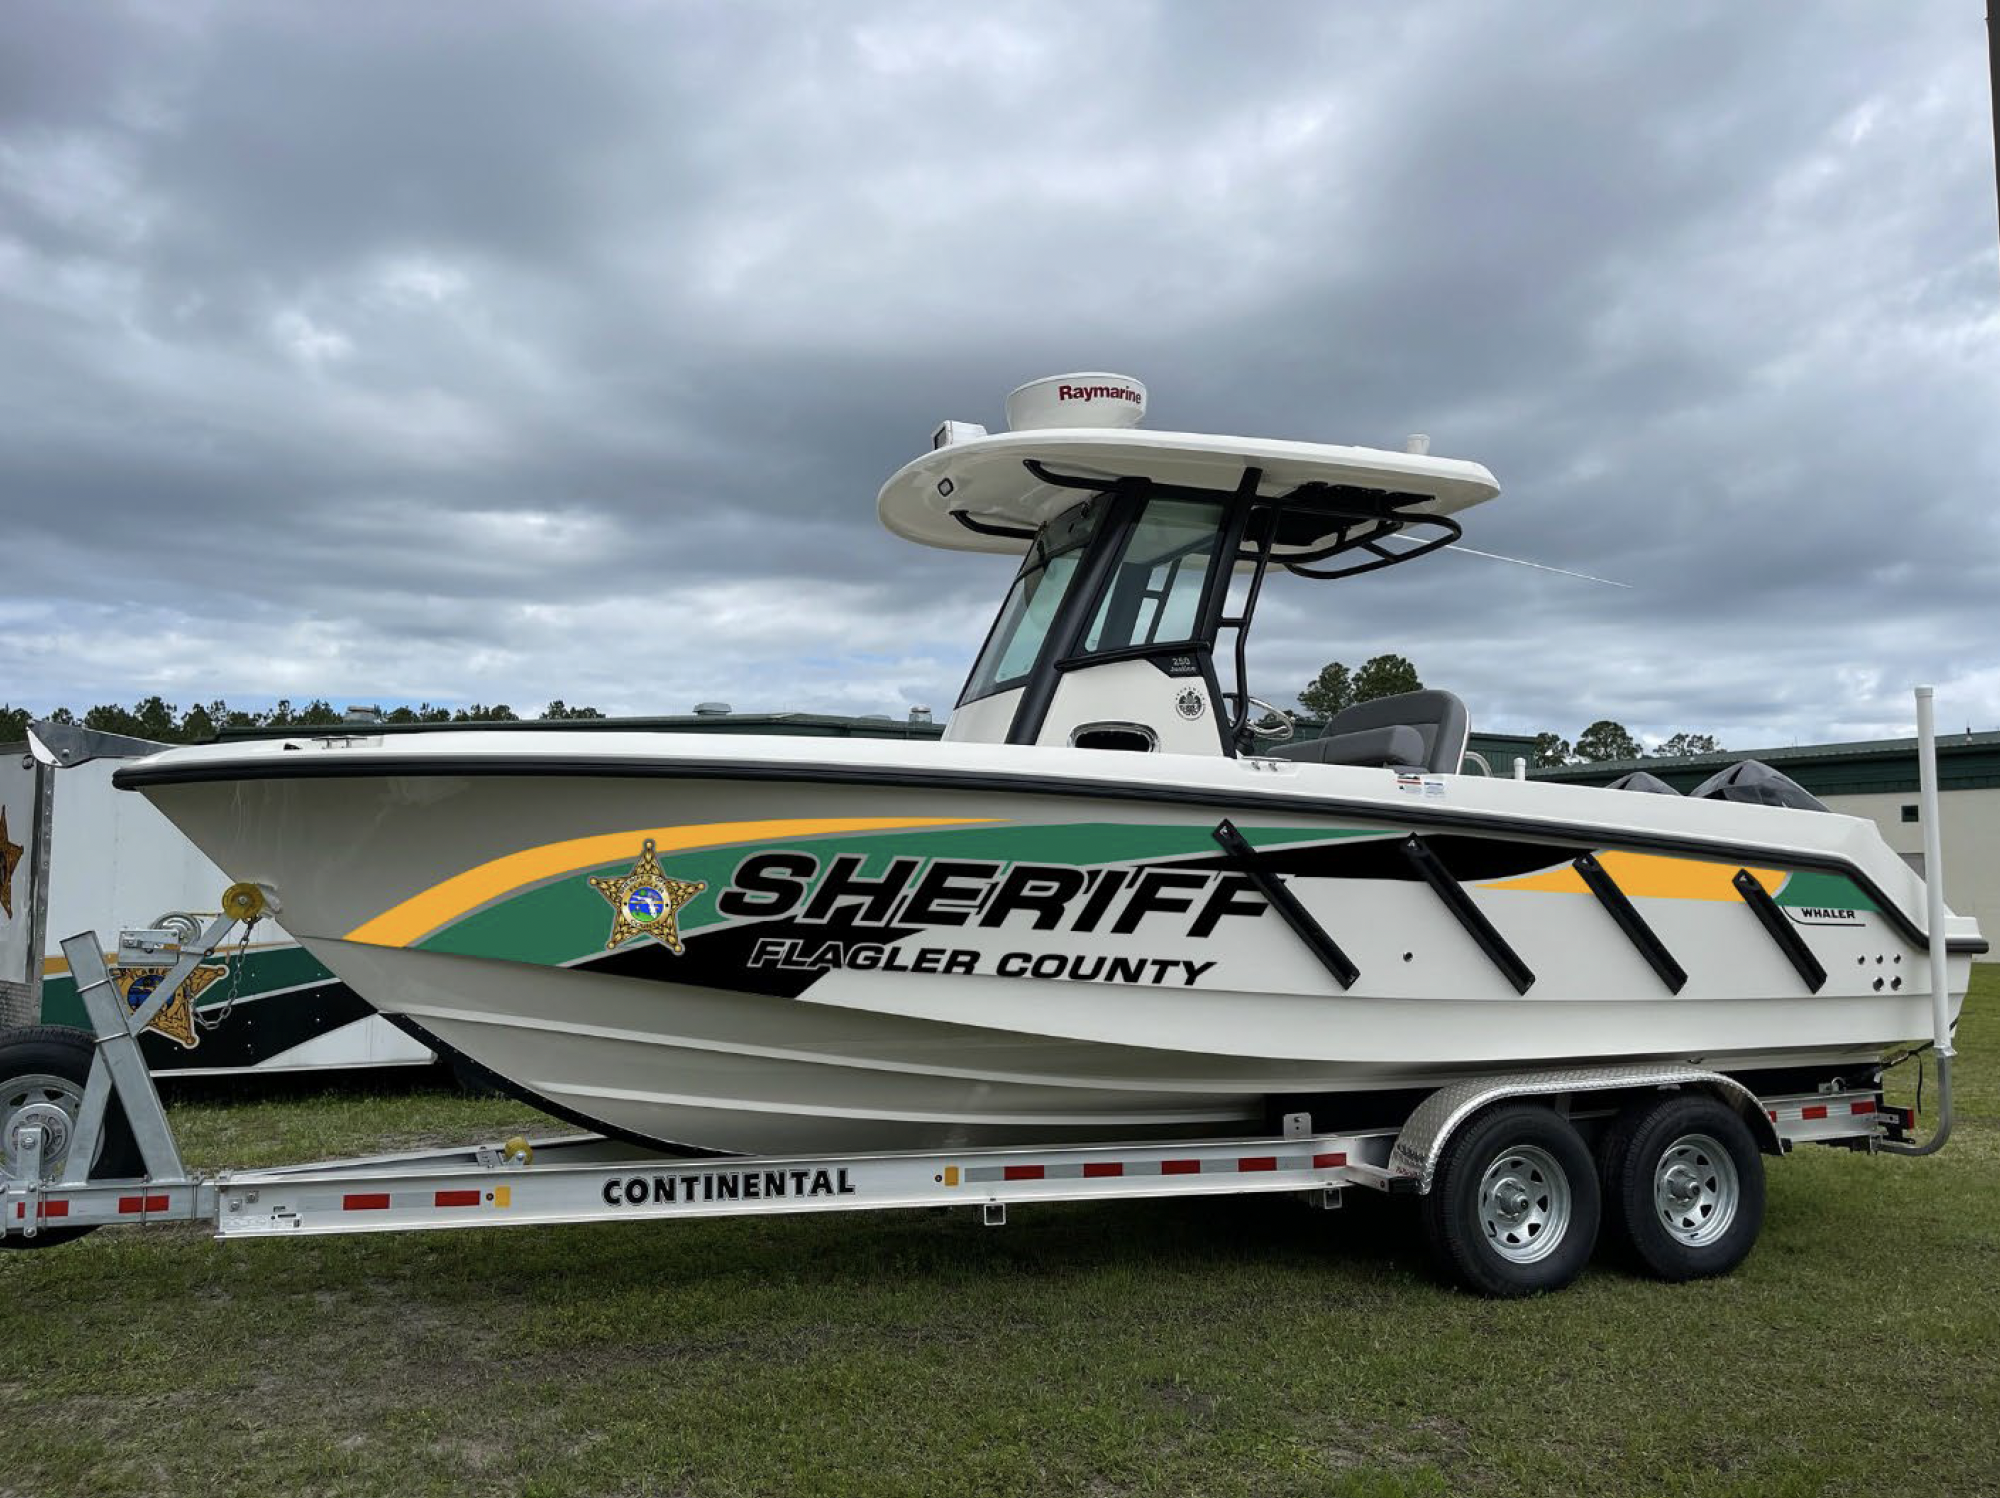 The FCSO's new marine patrol vessel. Photo courtesy of the FCSO